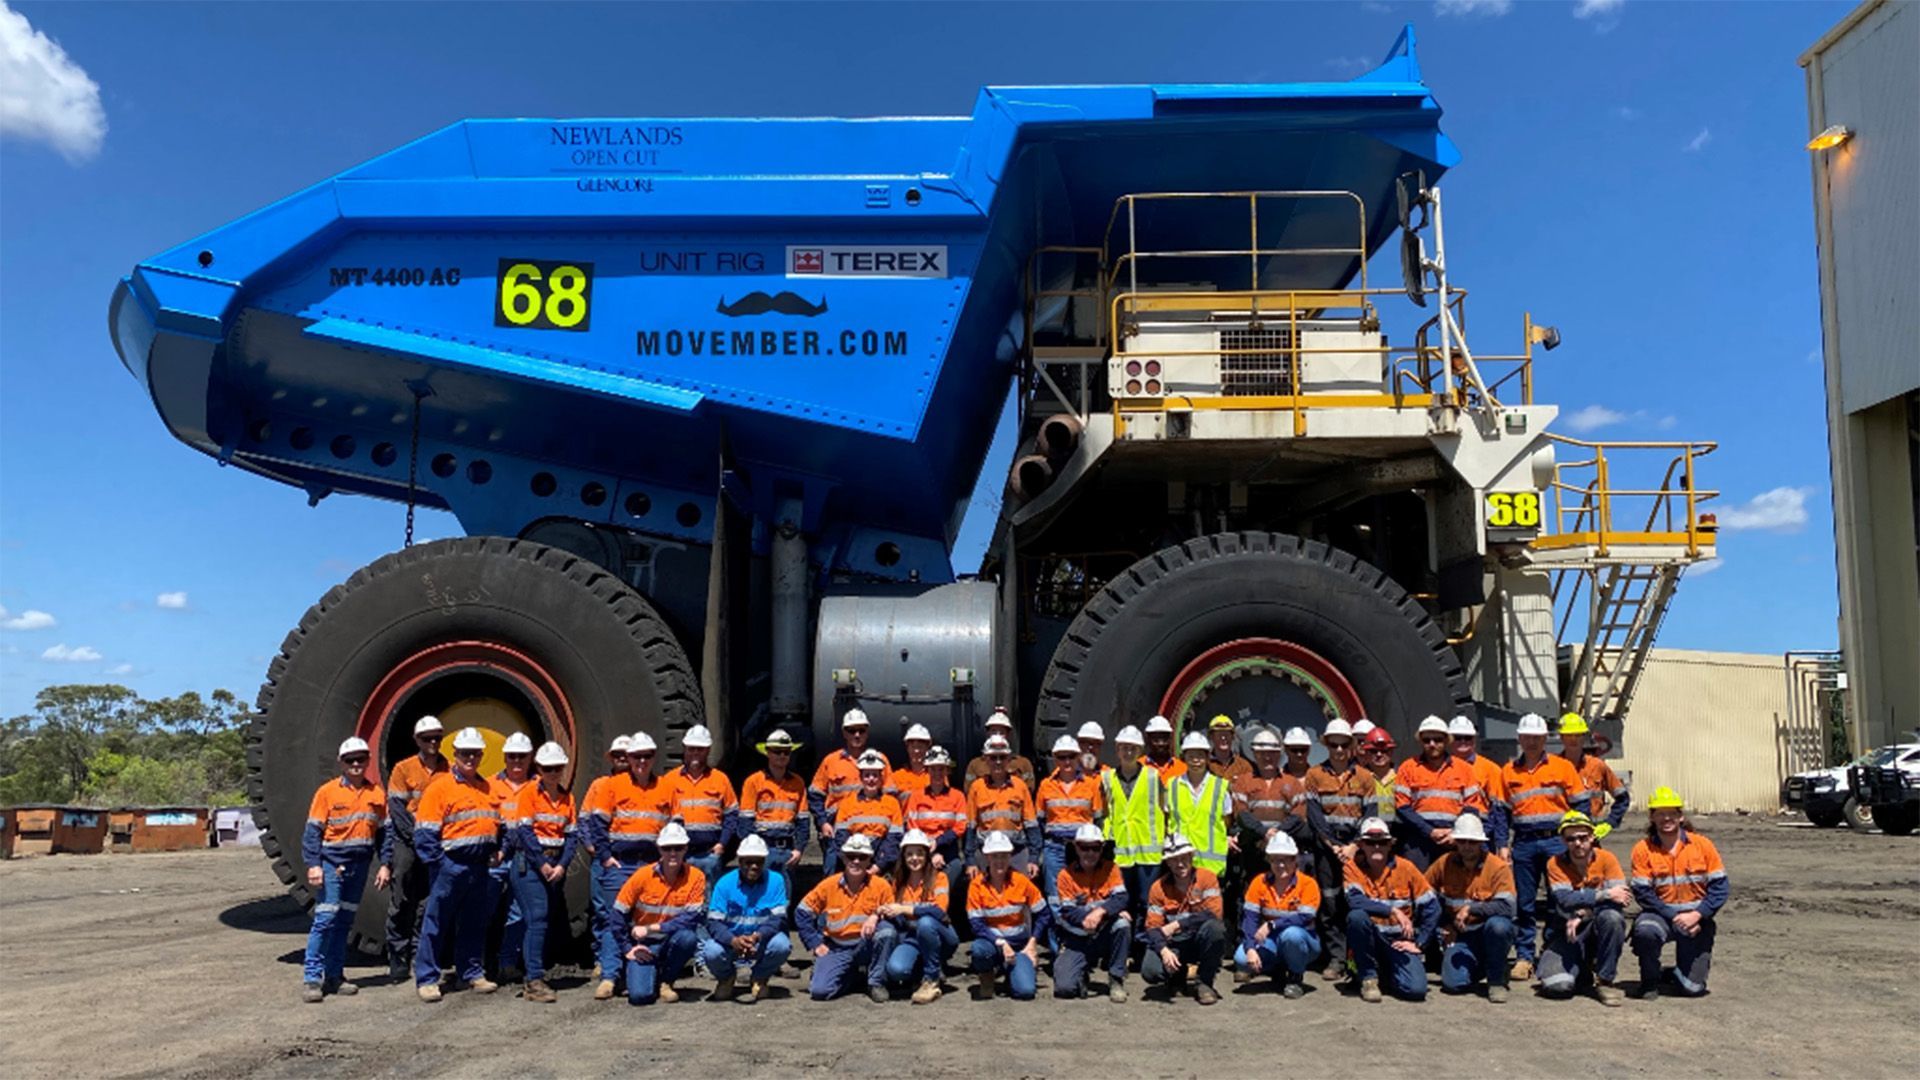 A side-view photo of a very large blue mining dump truck. A team of miners in high visibility gear pose to camera.